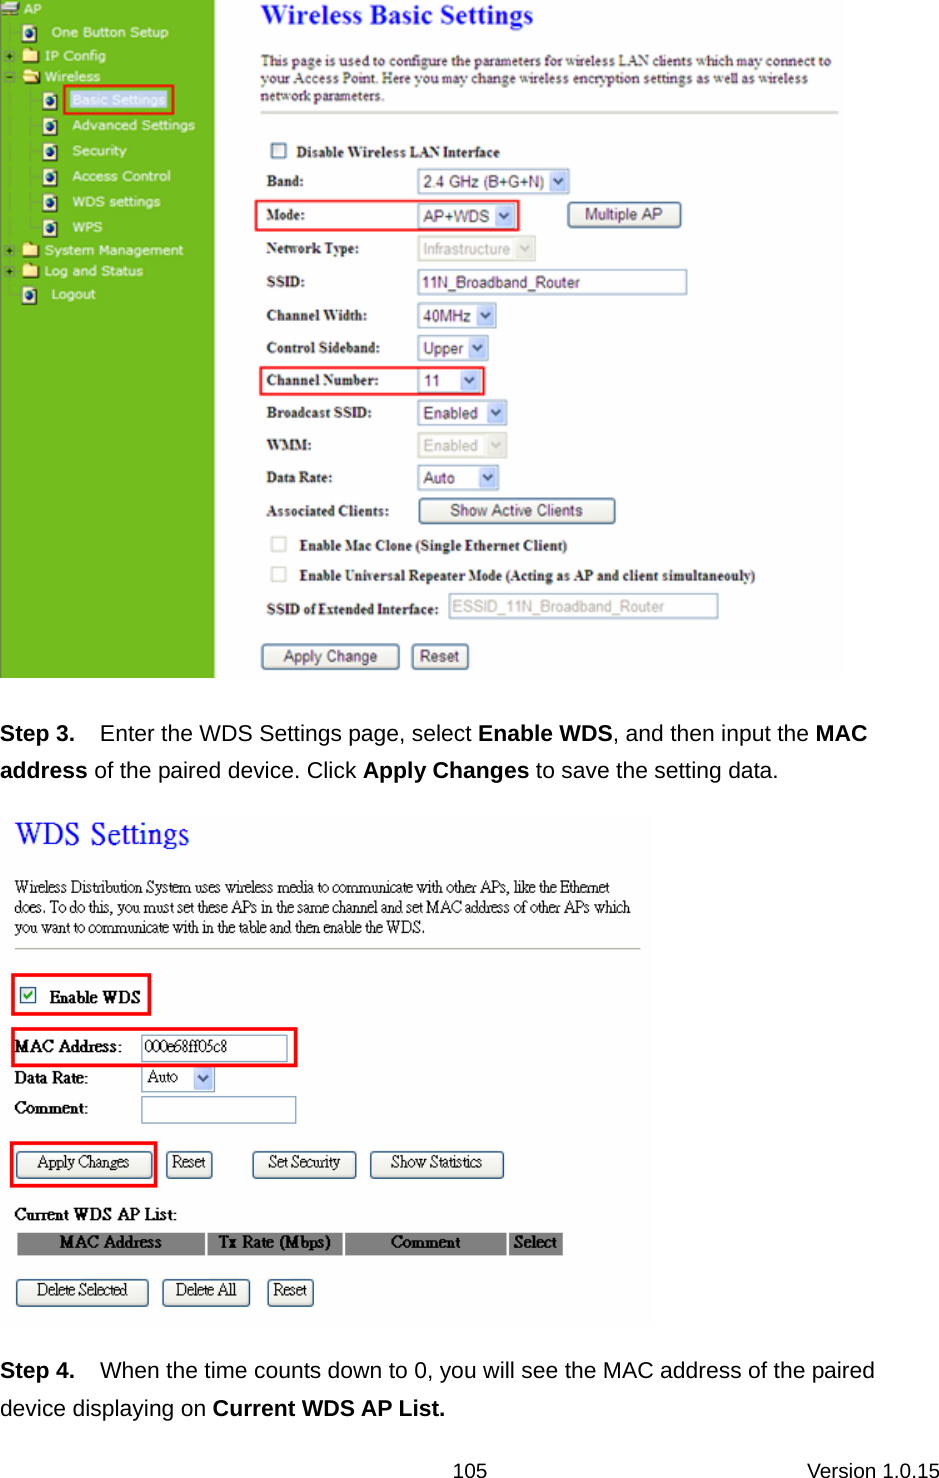 Version 1.0.15 105 Step 3.  Enter the WDS Settings page, select Enable WDS, and then input the MAC address of the paired device. Click Apply Changes to save the setting data.  Step 4.  When the time counts down to 0, you will see the MAC address of the paired device displaying on Current WDS AP List. 